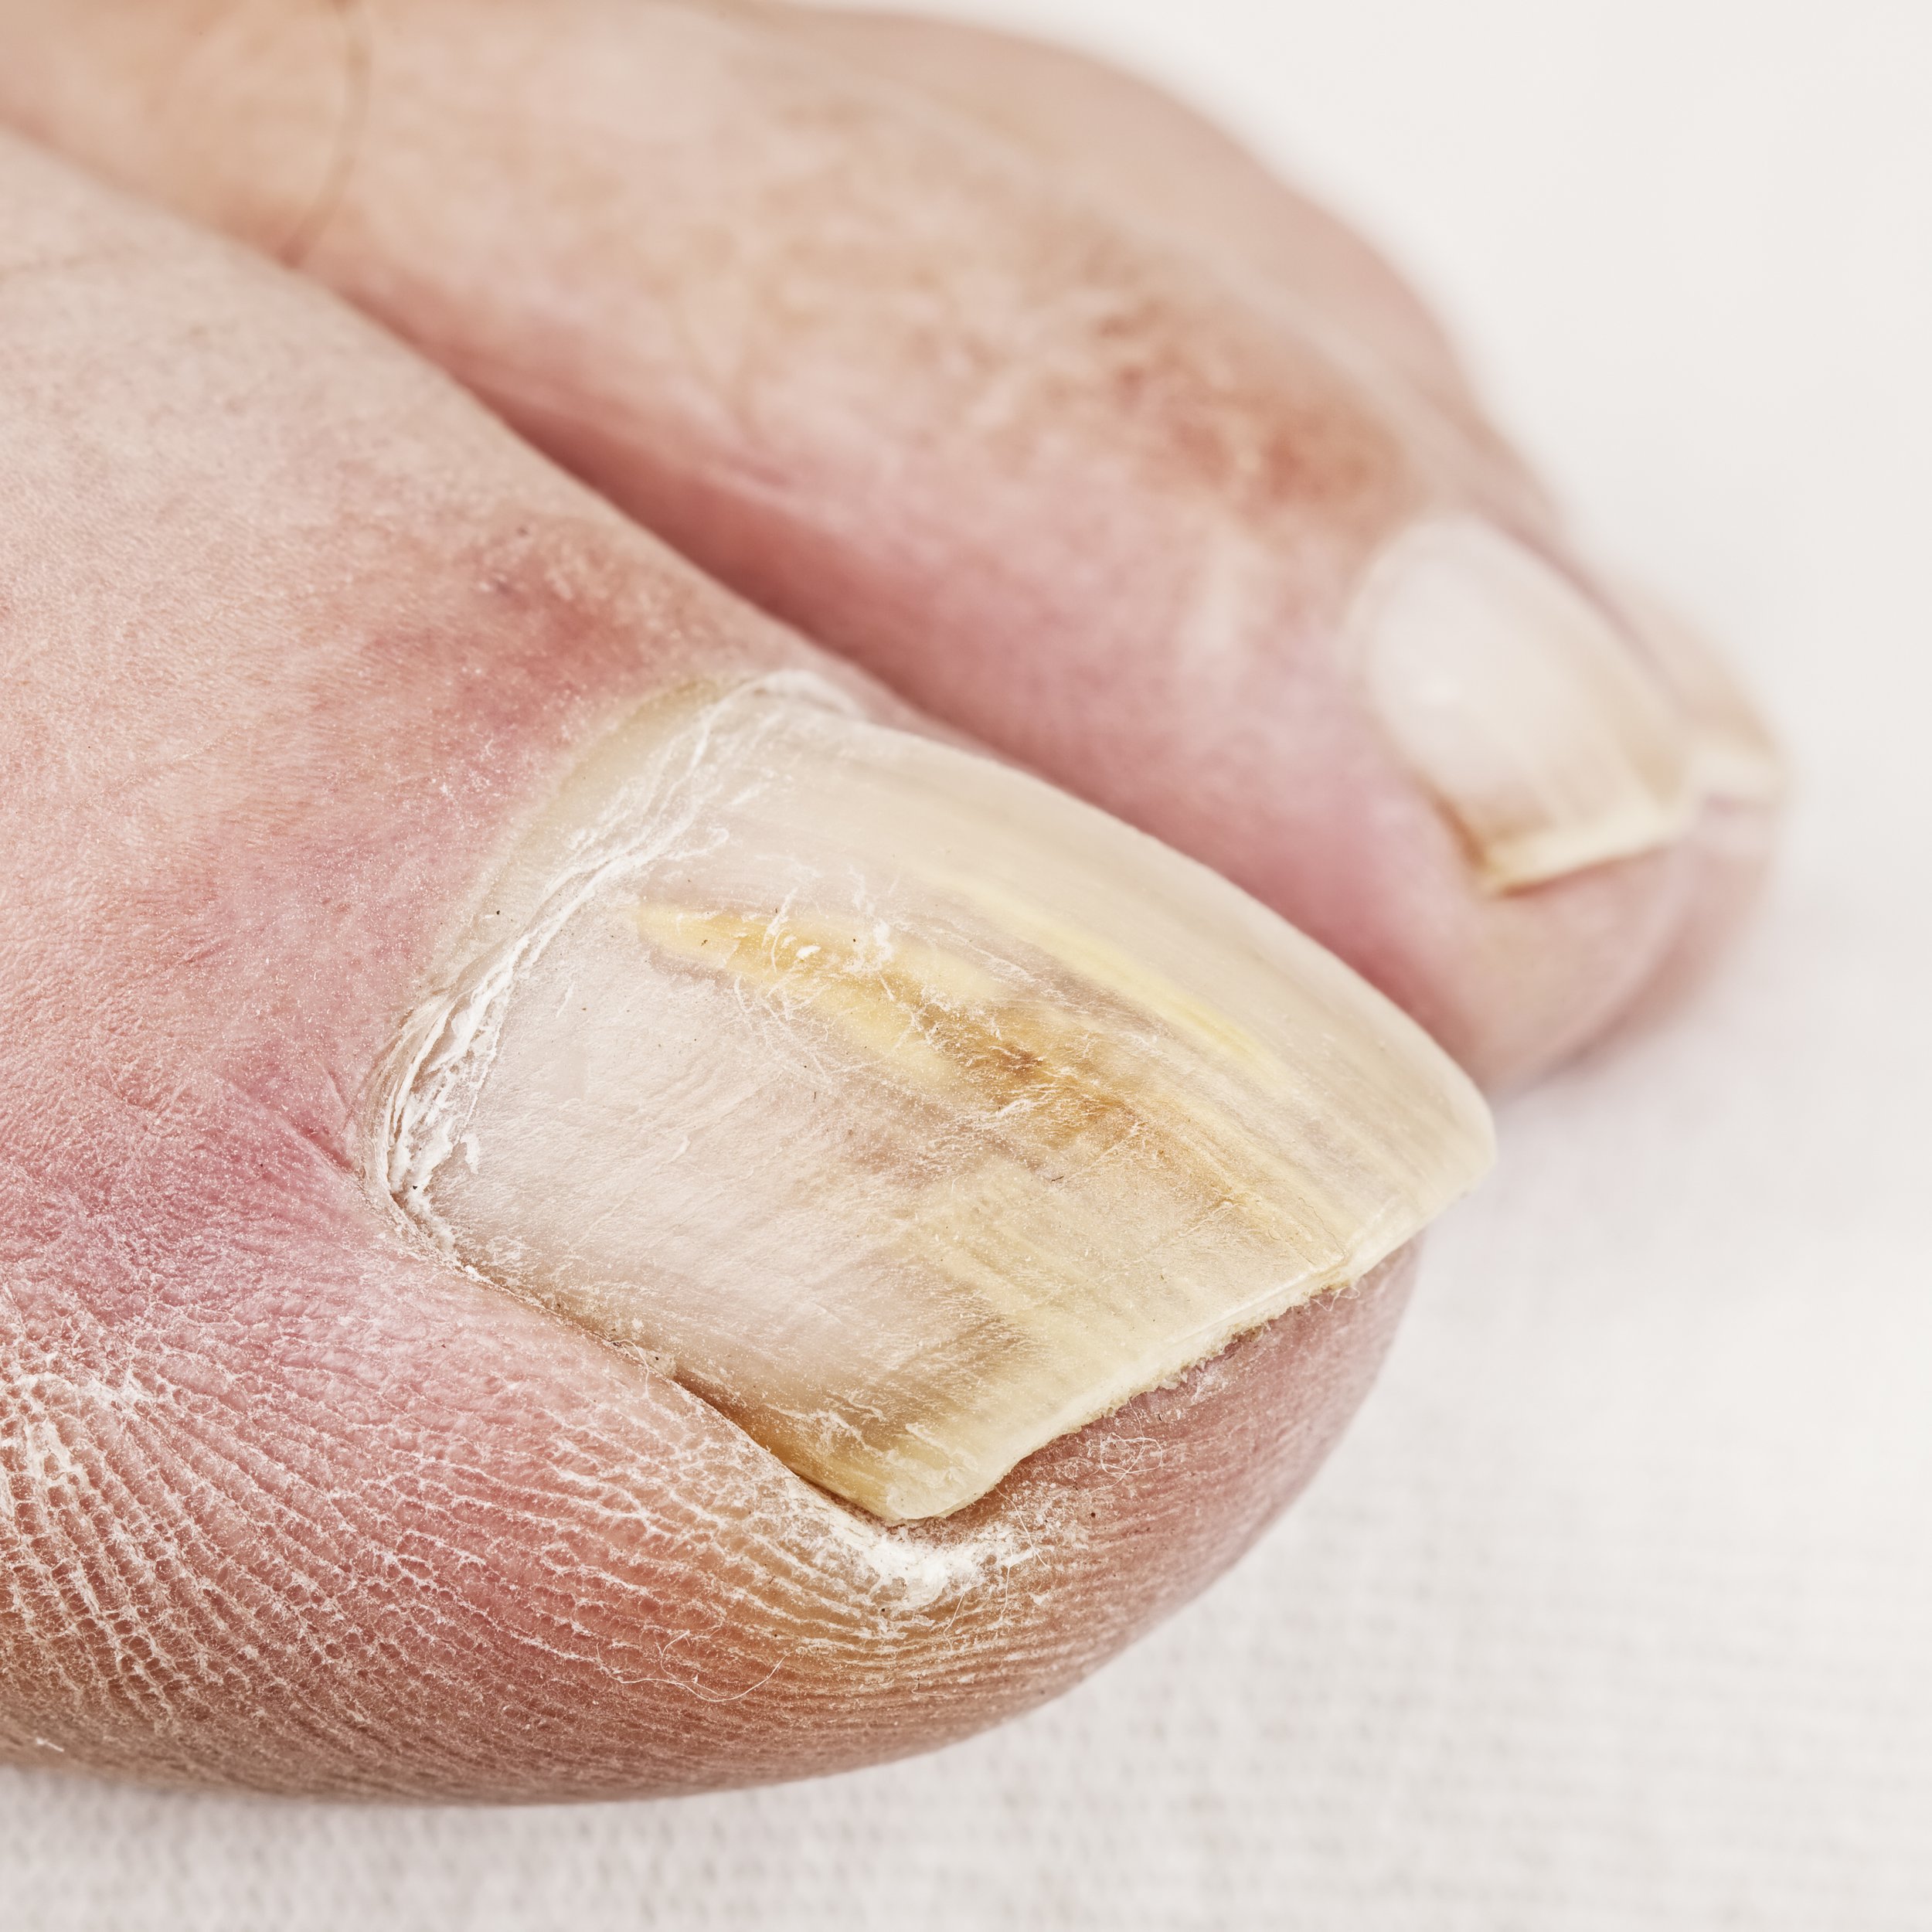 What Your Fingernails Say About Your Health